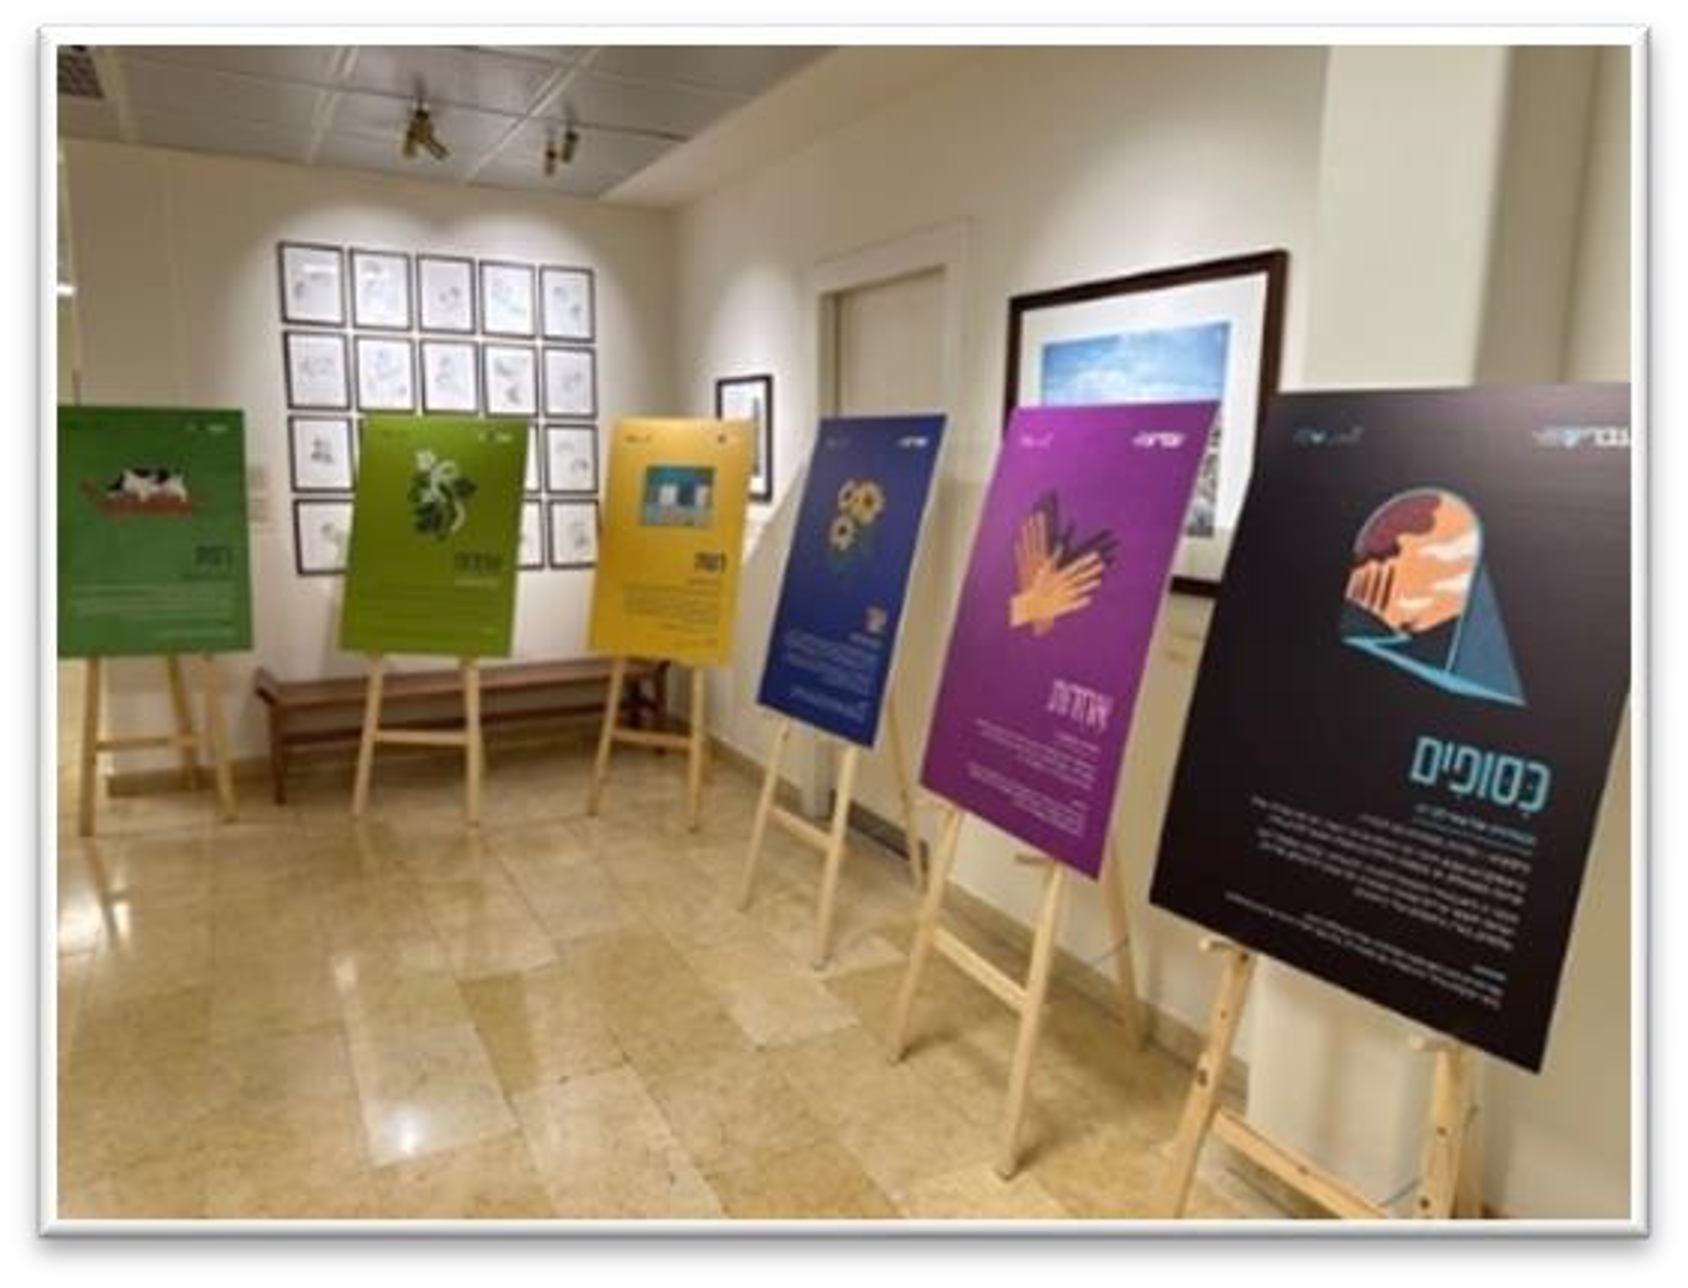 An exhibition of Hebrew words